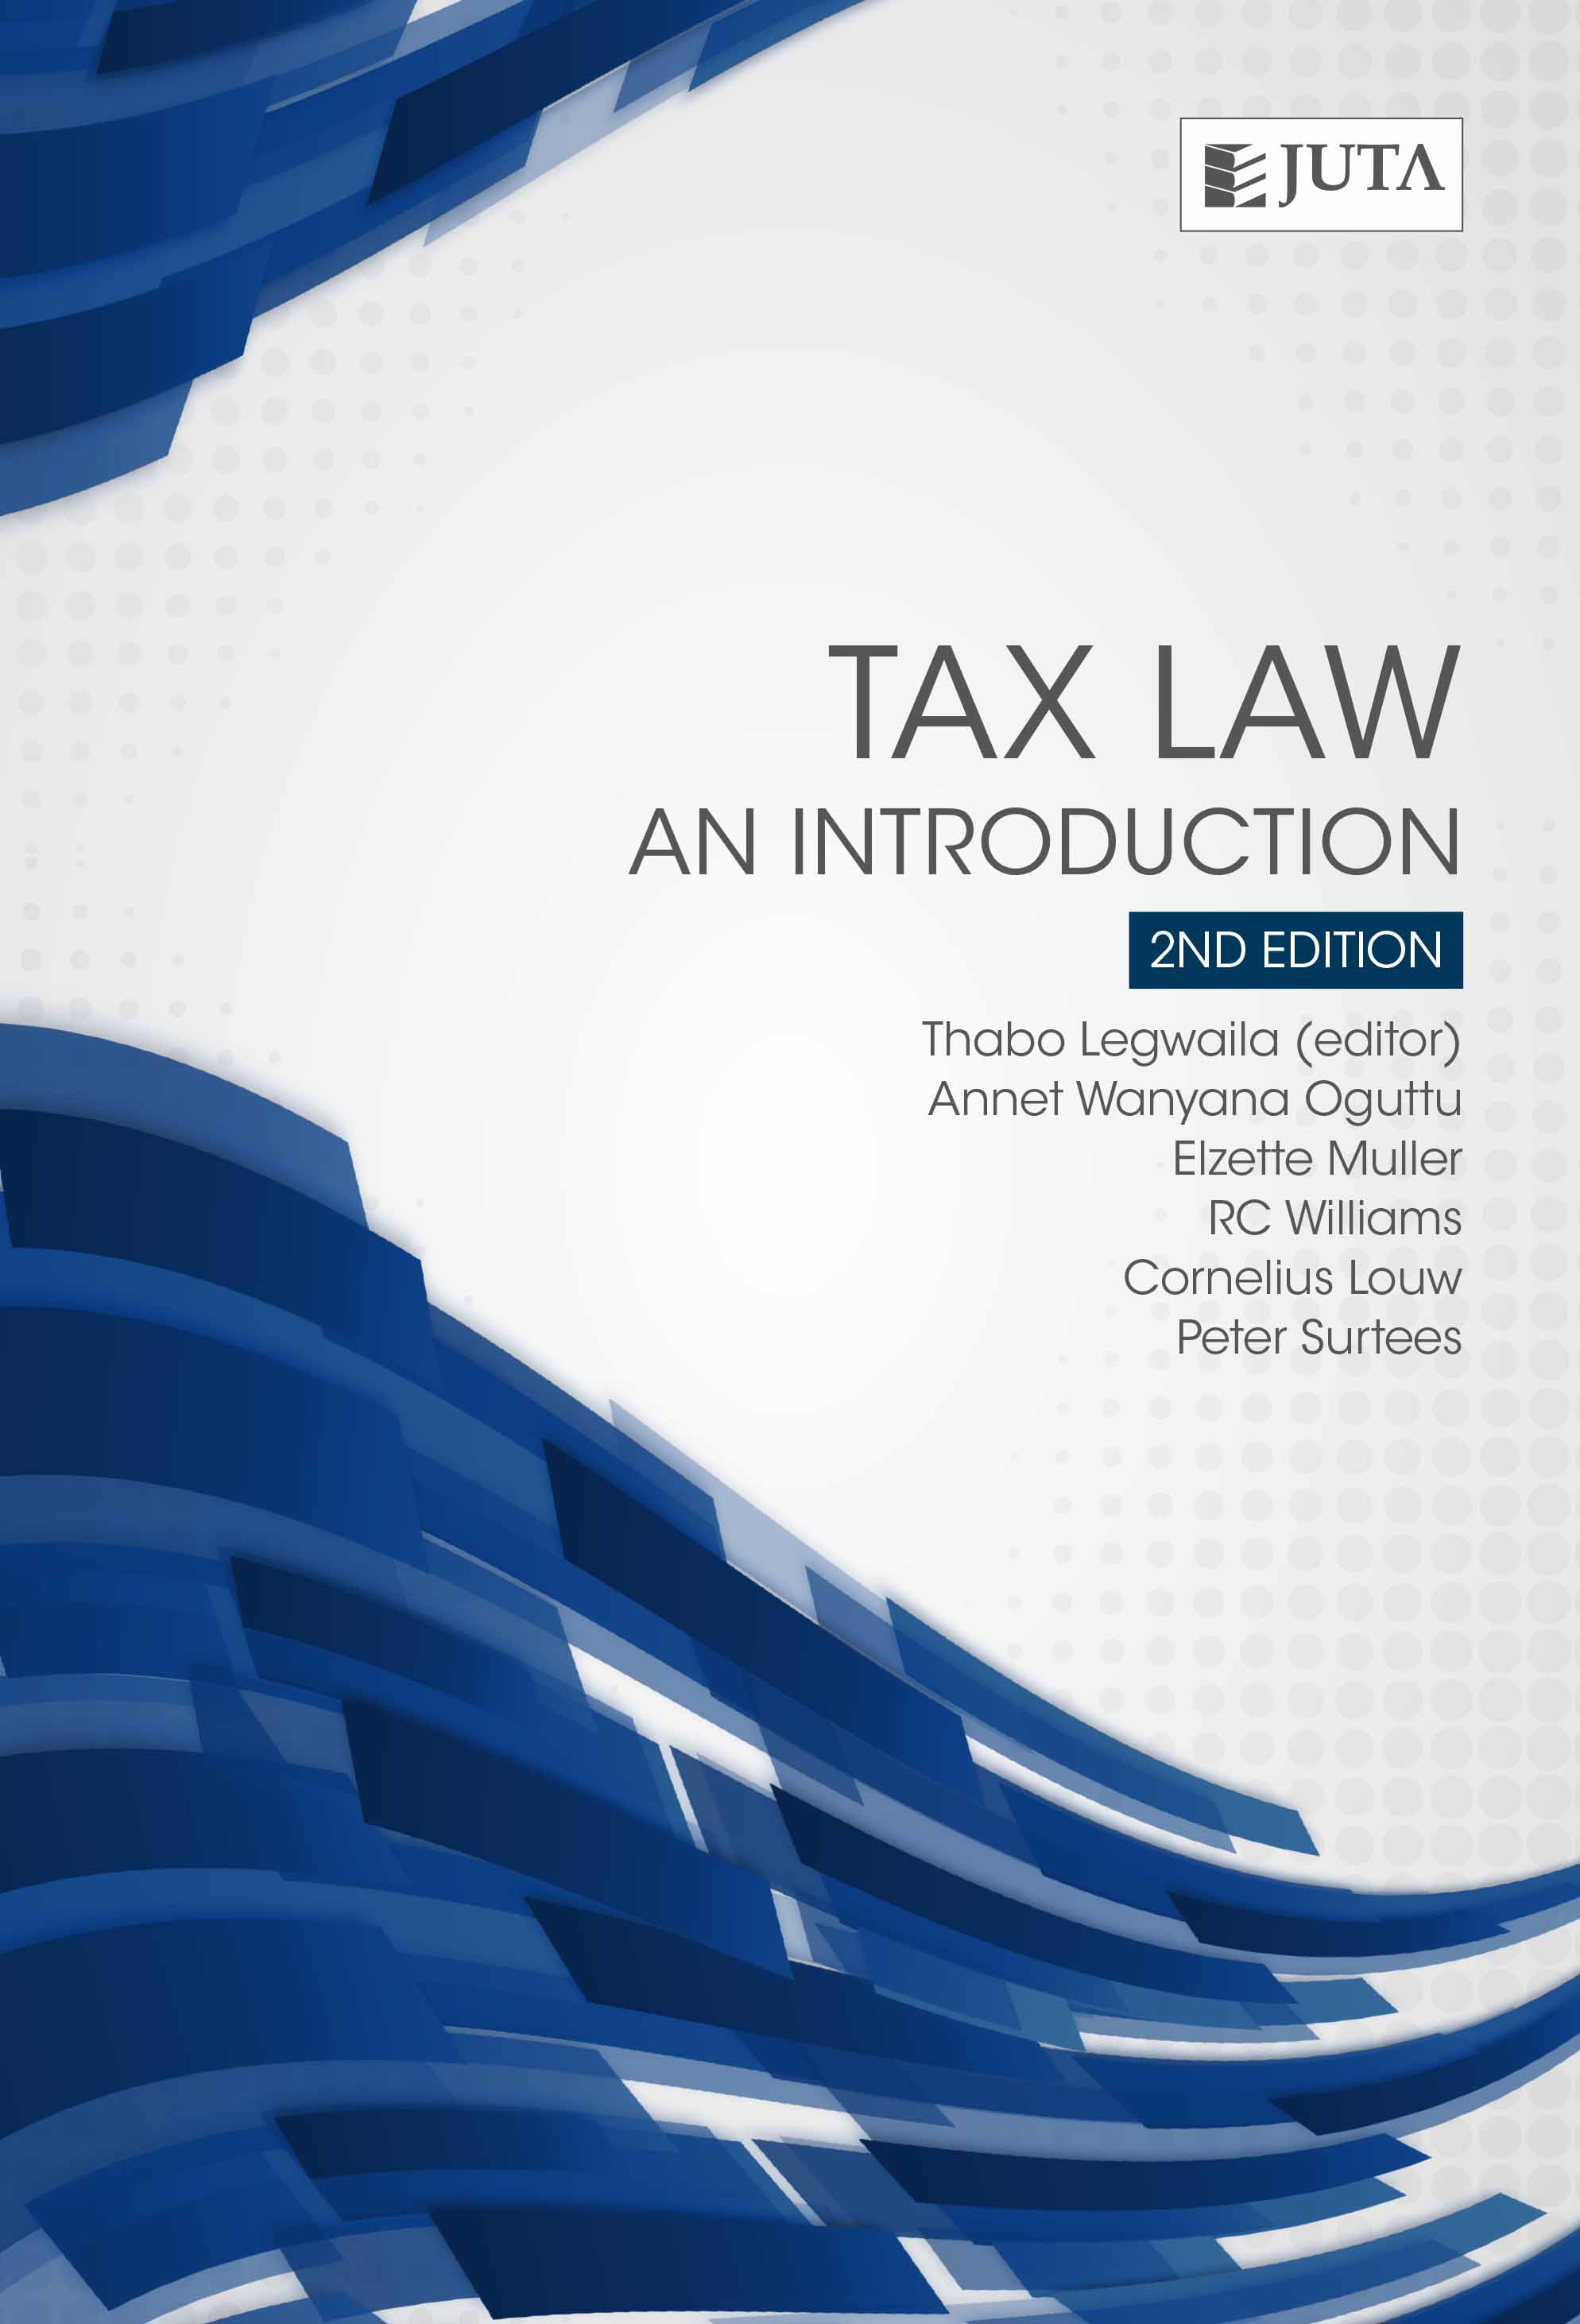 Tax Law: An Introduction